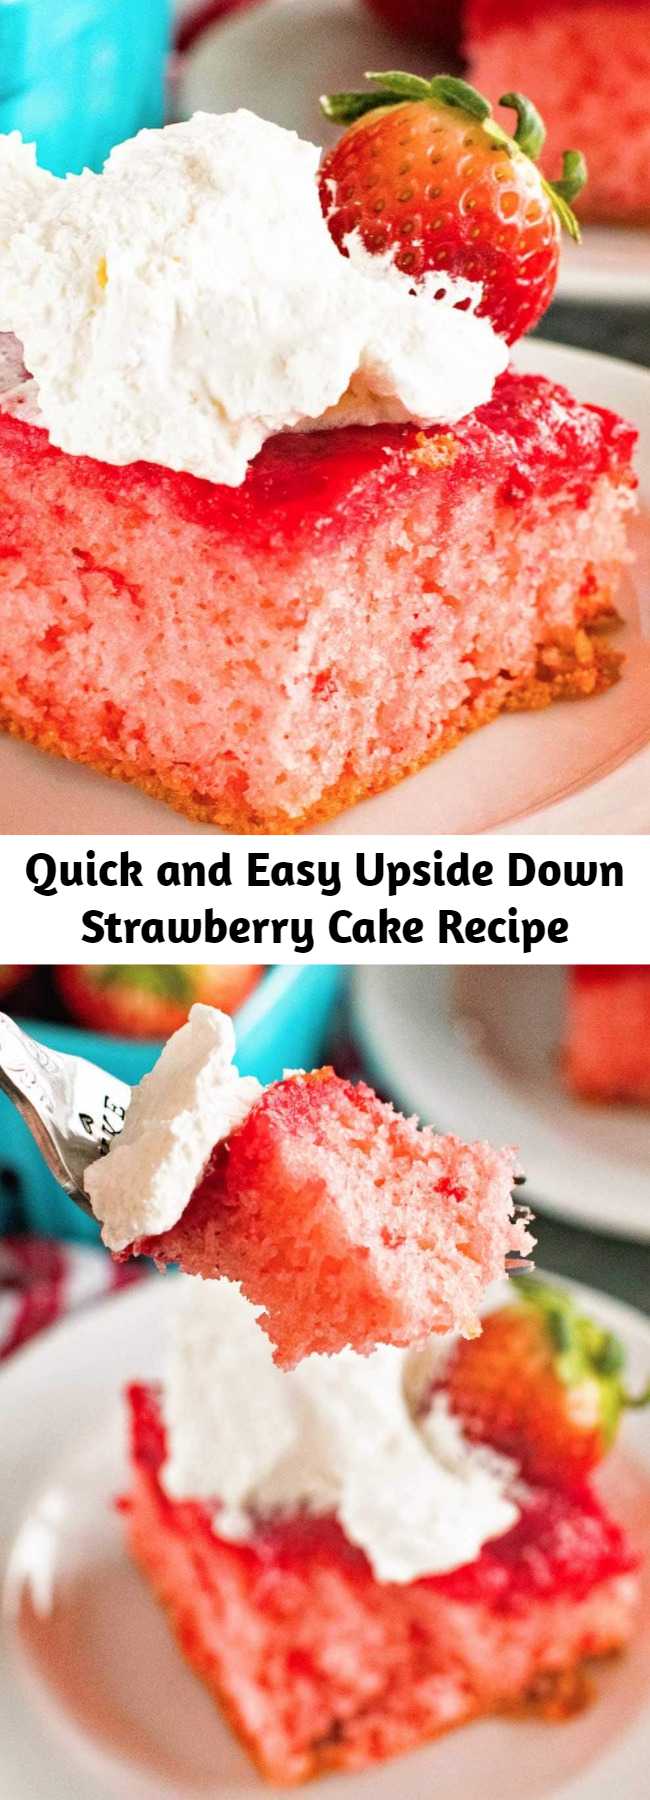 Quick and Easy Upside Down Strawberry Cake Recipe - Need a quick and easy dessert that’s bursting with flavor? This easy Strawberry Upside Down Cake only requires a boxed strawberry cake mix plus a few more ingredients. The result is a light, fluffy cake that’s bursting with strawberry flavor that’s impressive, yet easy. It's so easy anyone can make it!